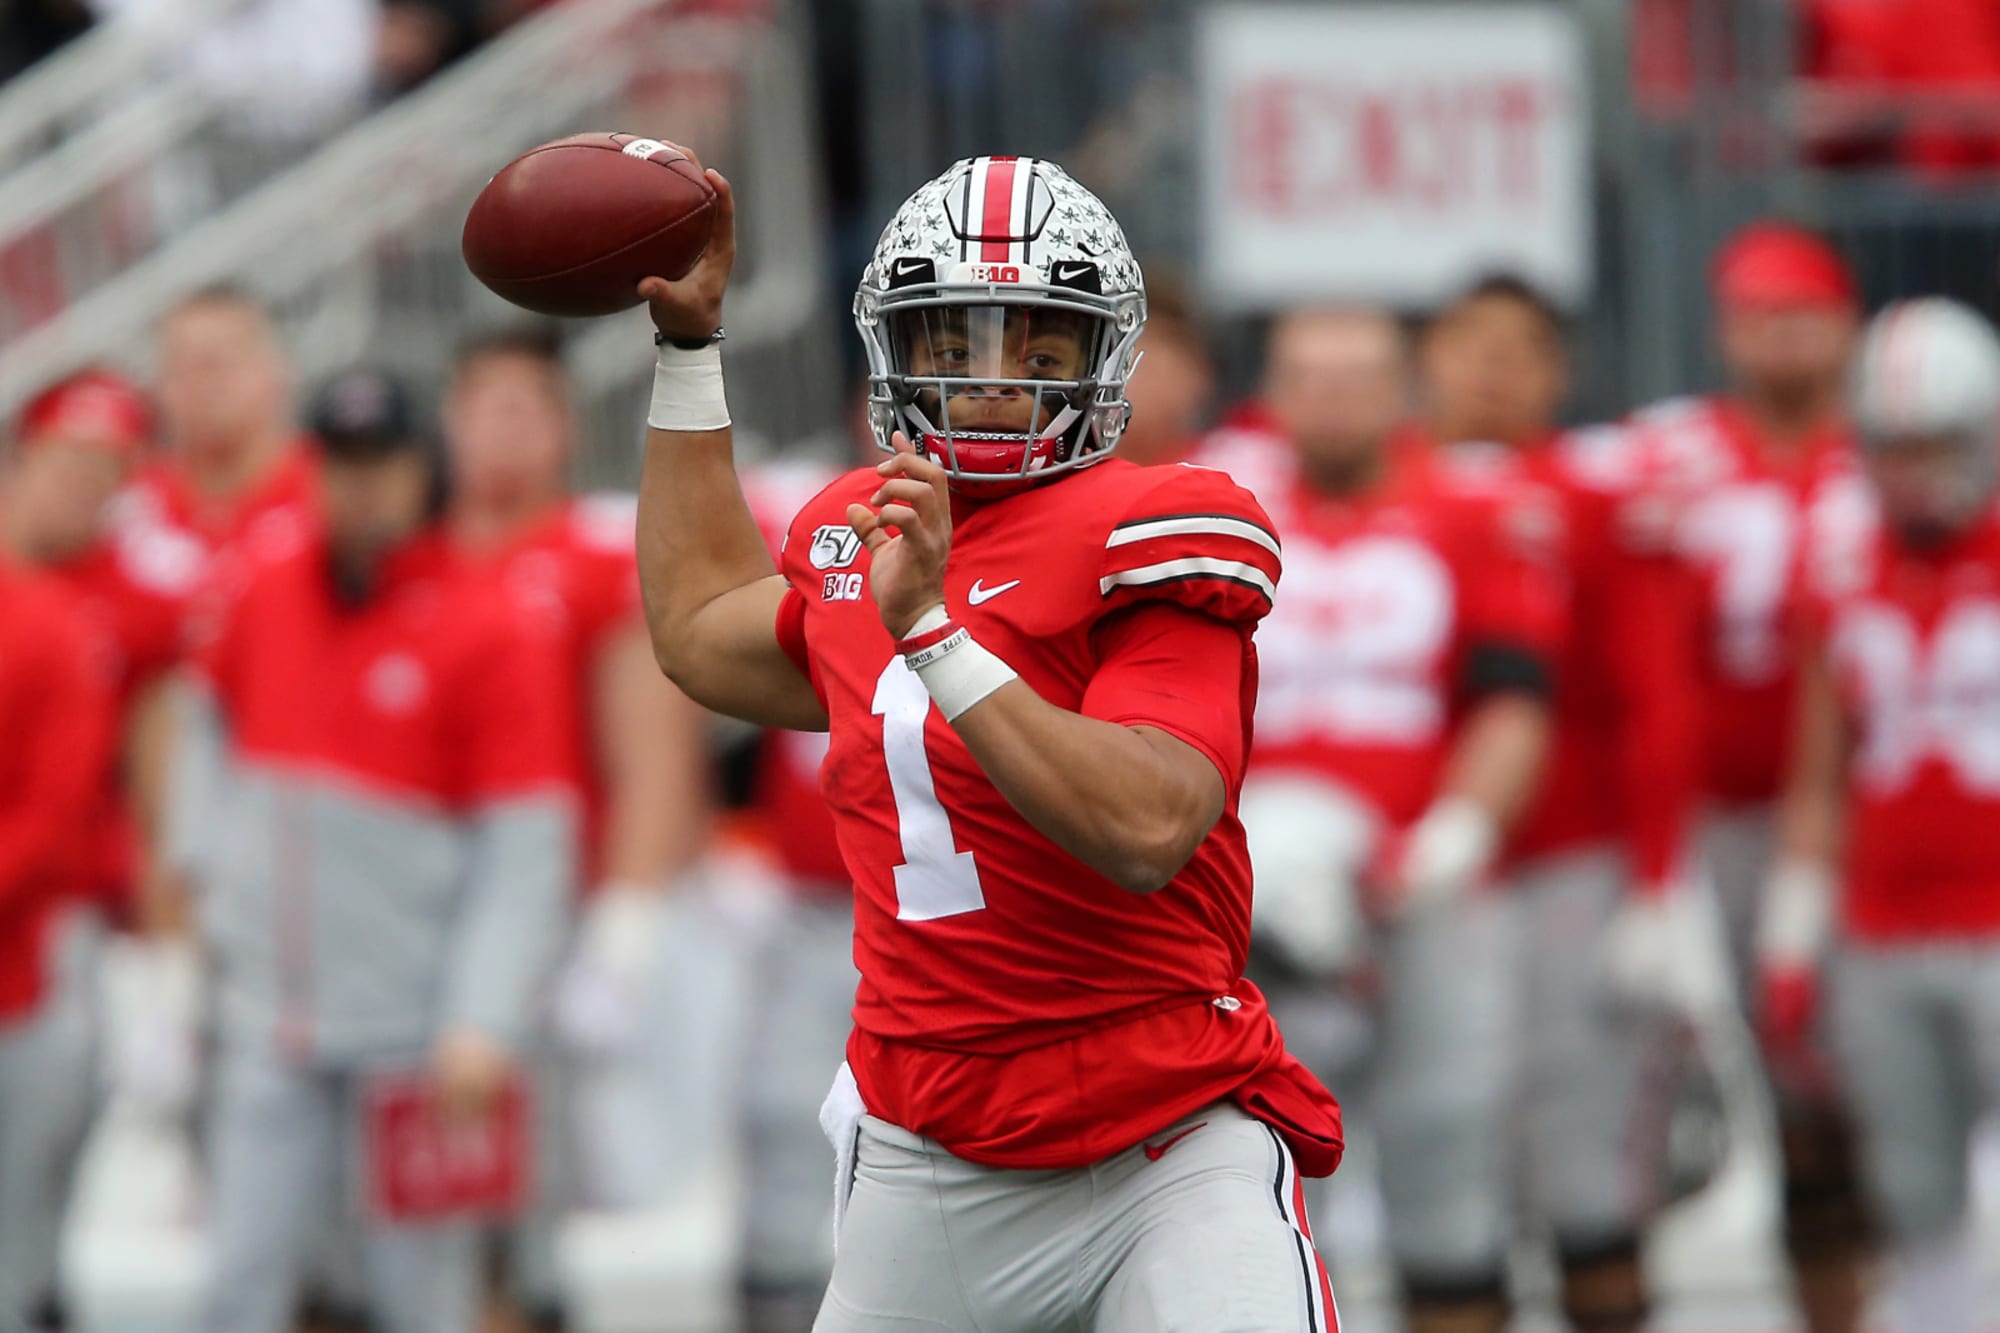 Penn State vs. Ohio State live stream Watch online, betting odds, more